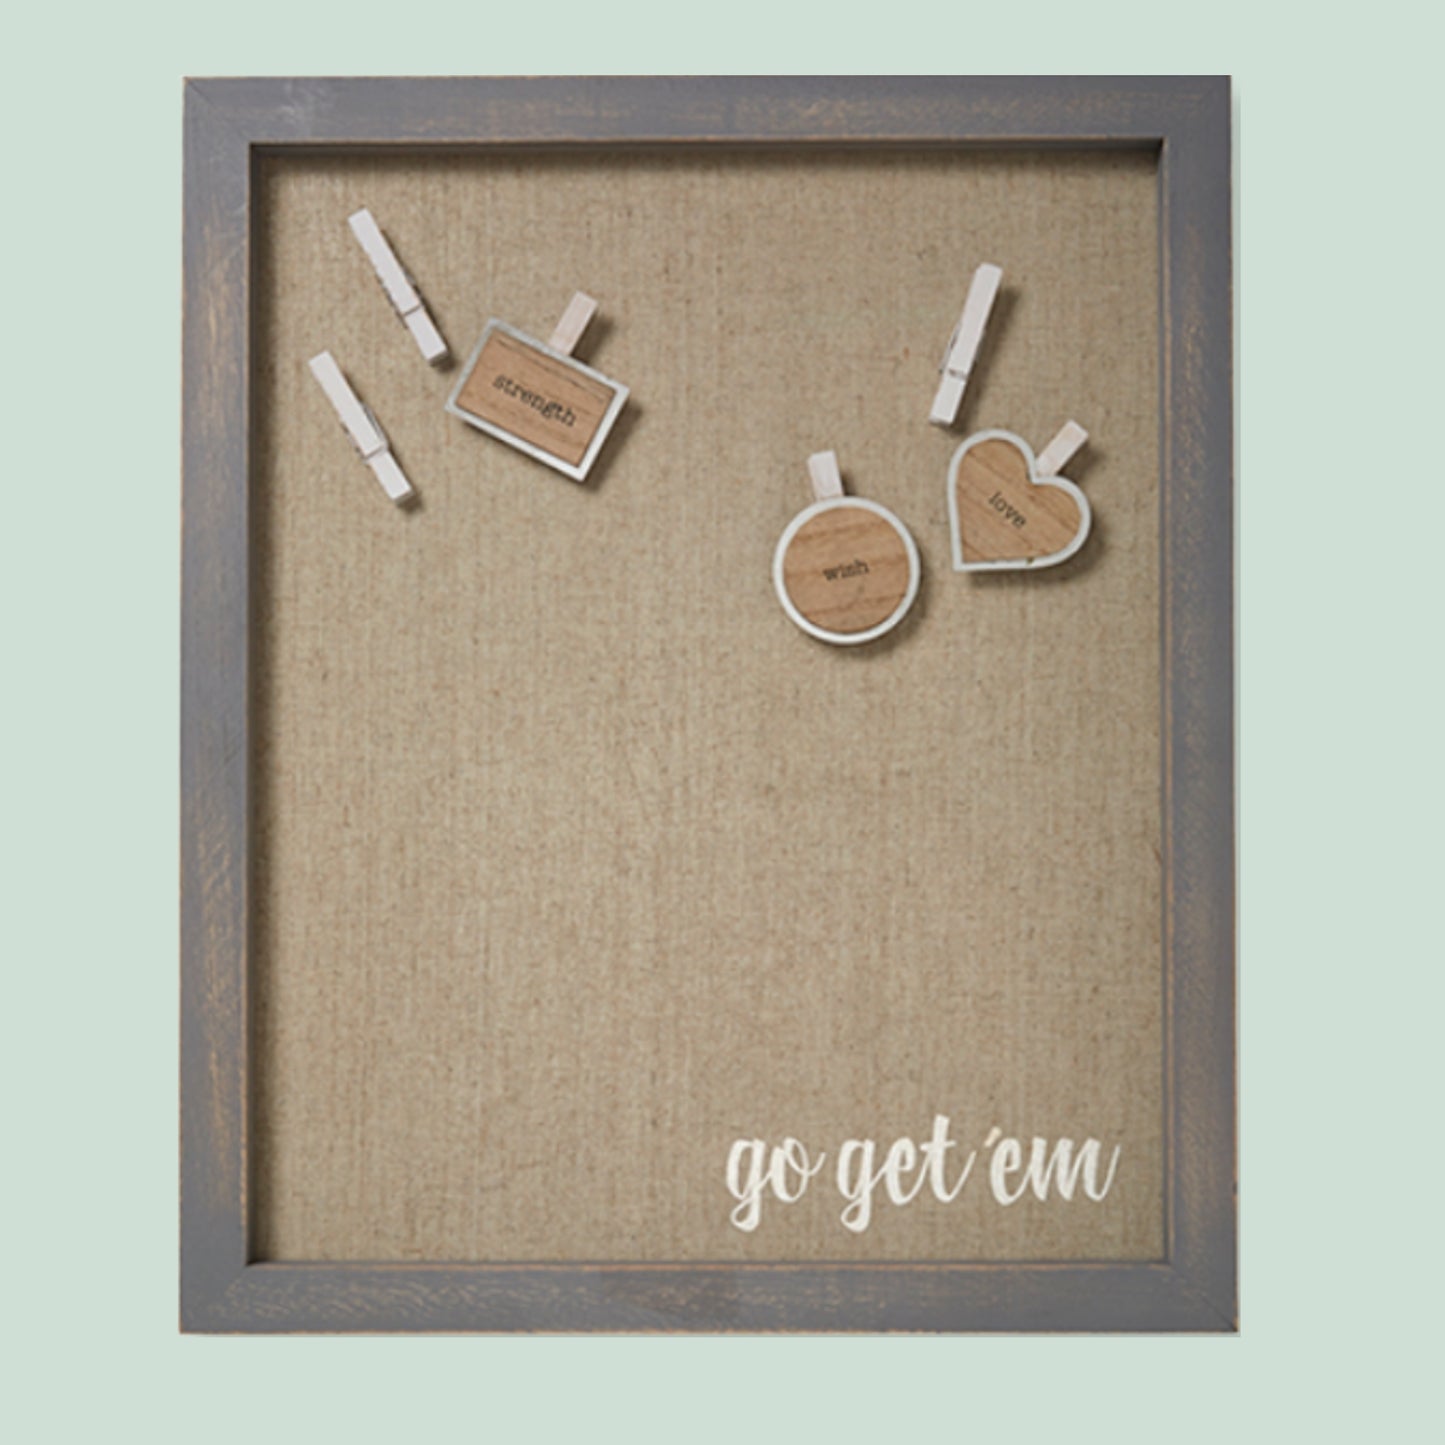 Go Get 'Em Home Office Magnetic Board - Fabric Framed Functional Wall Art (15x18) shown on light pistachio office wall | oak7west.com